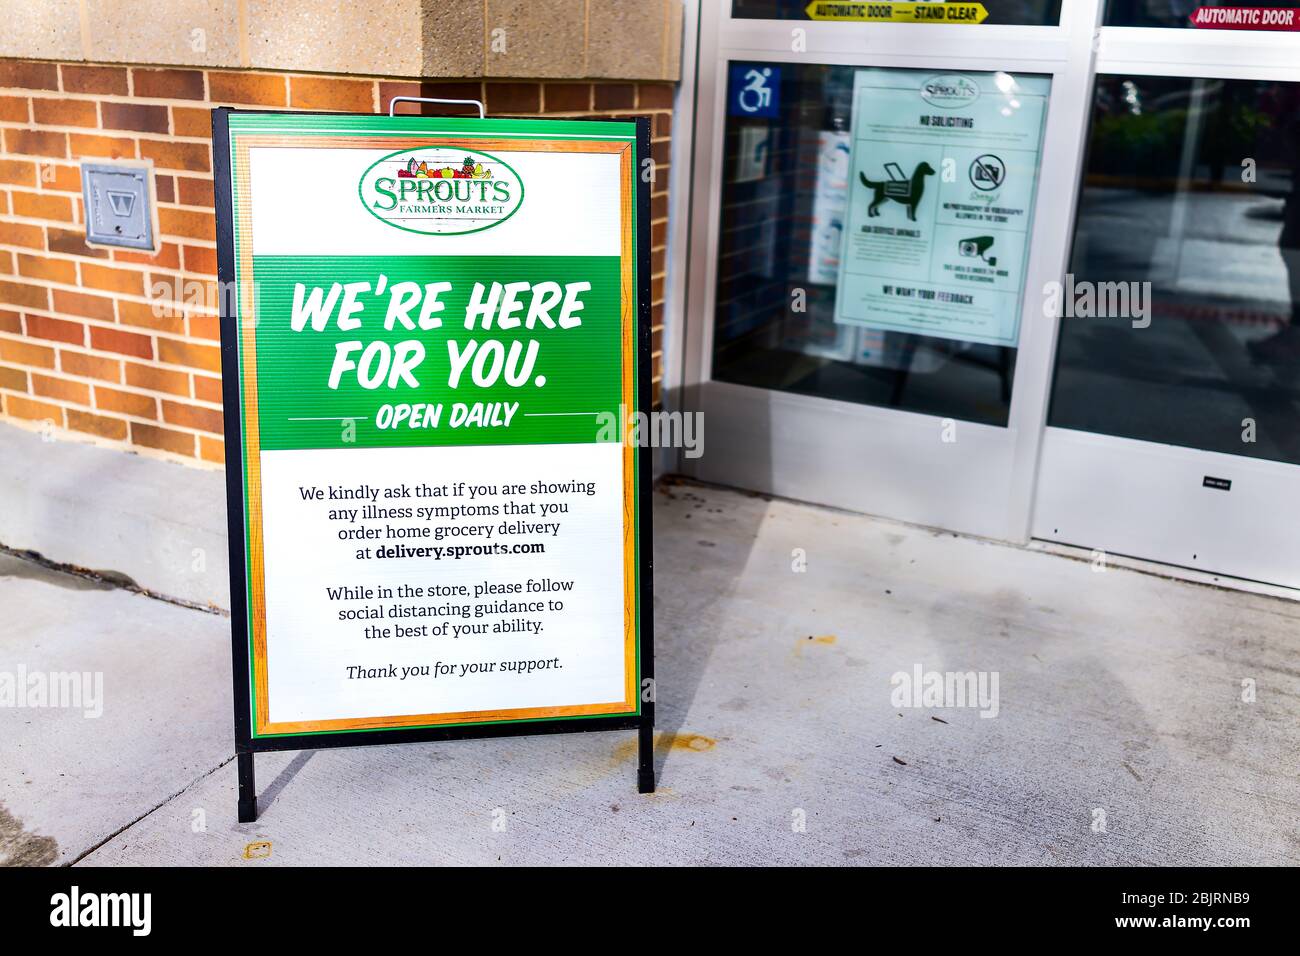 Herndon, USA - April 27, 2020: Sprouts Farmers Market sign for grocery store entrance for social distancing delivery during coronavirus Covid-19 epide Stock Photo